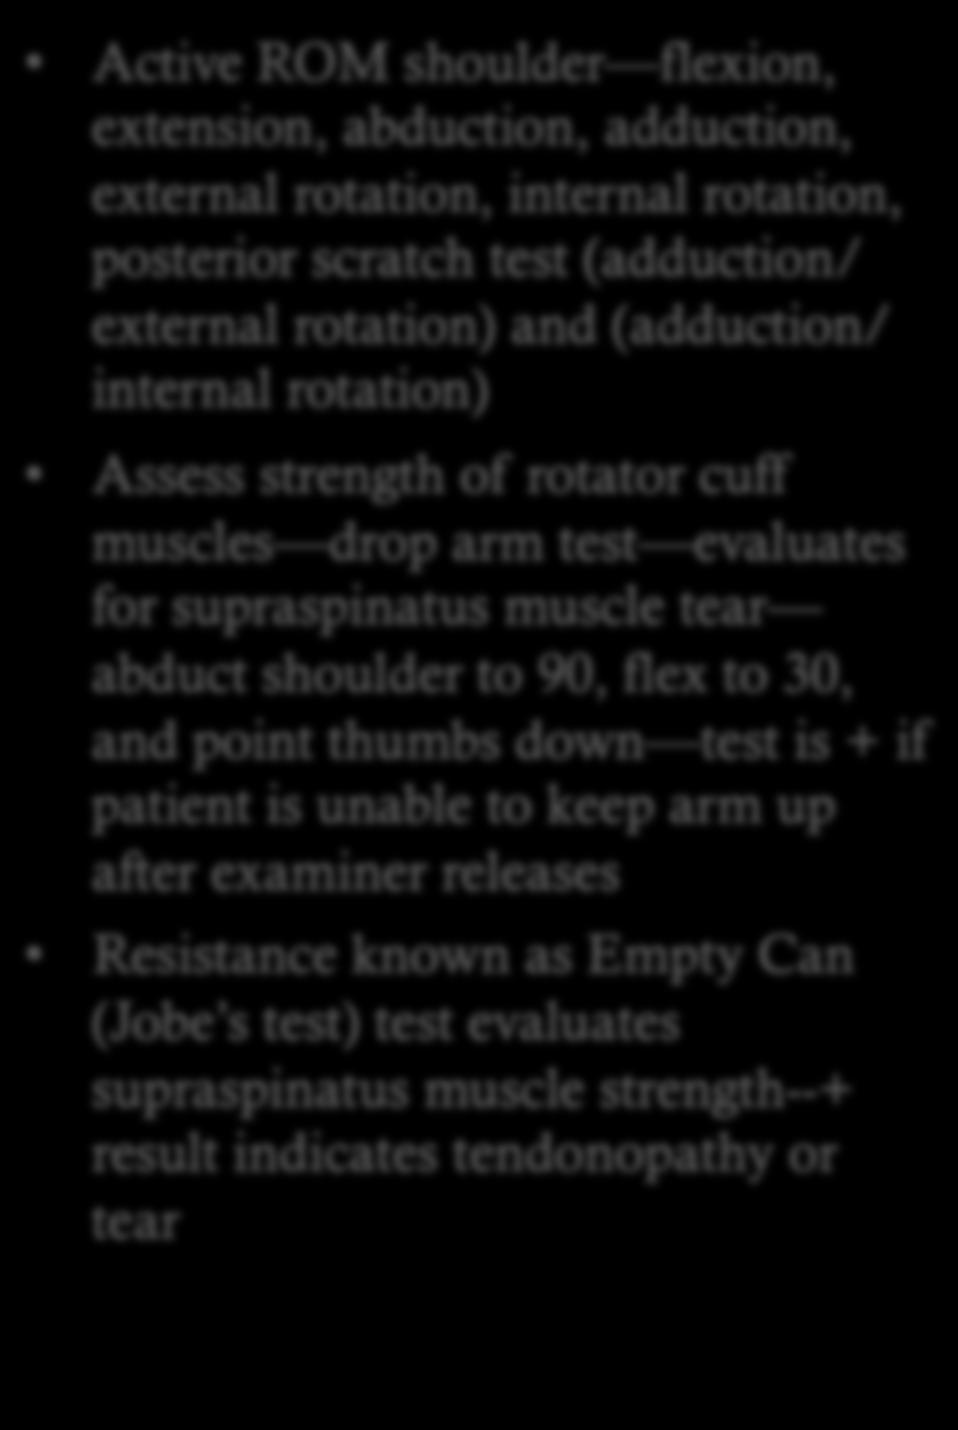 after examiner releases Resistance known as Empty Can (Jobe s test) test evaluates supraspinatus muscle strength--+ result indicates tendonopathy or tear Infraspinatus and teres minor muscle strength